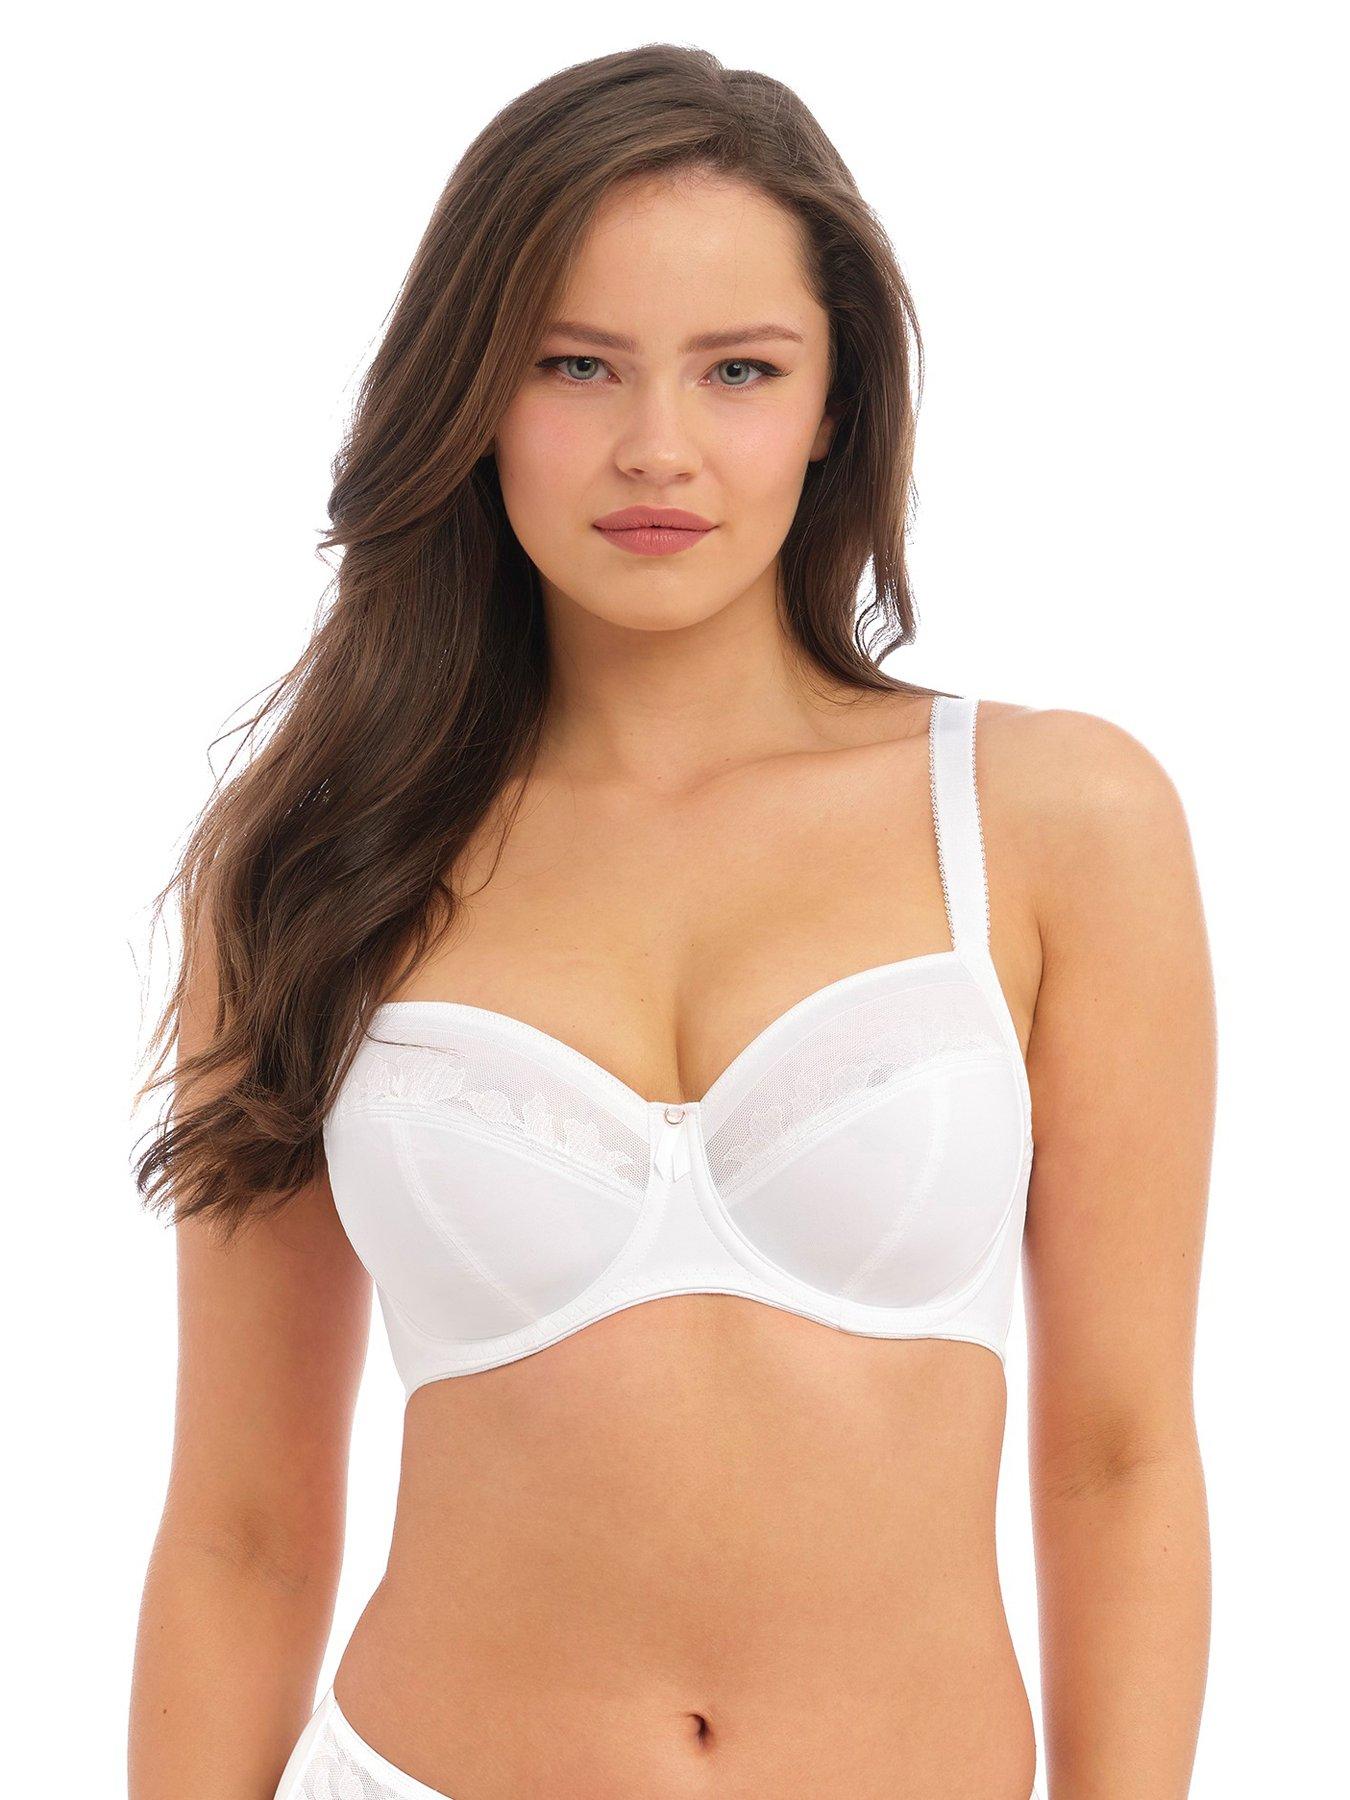 Buy Blue/White Pad Full Cup Lace Bras 2 Pack from the Next UK